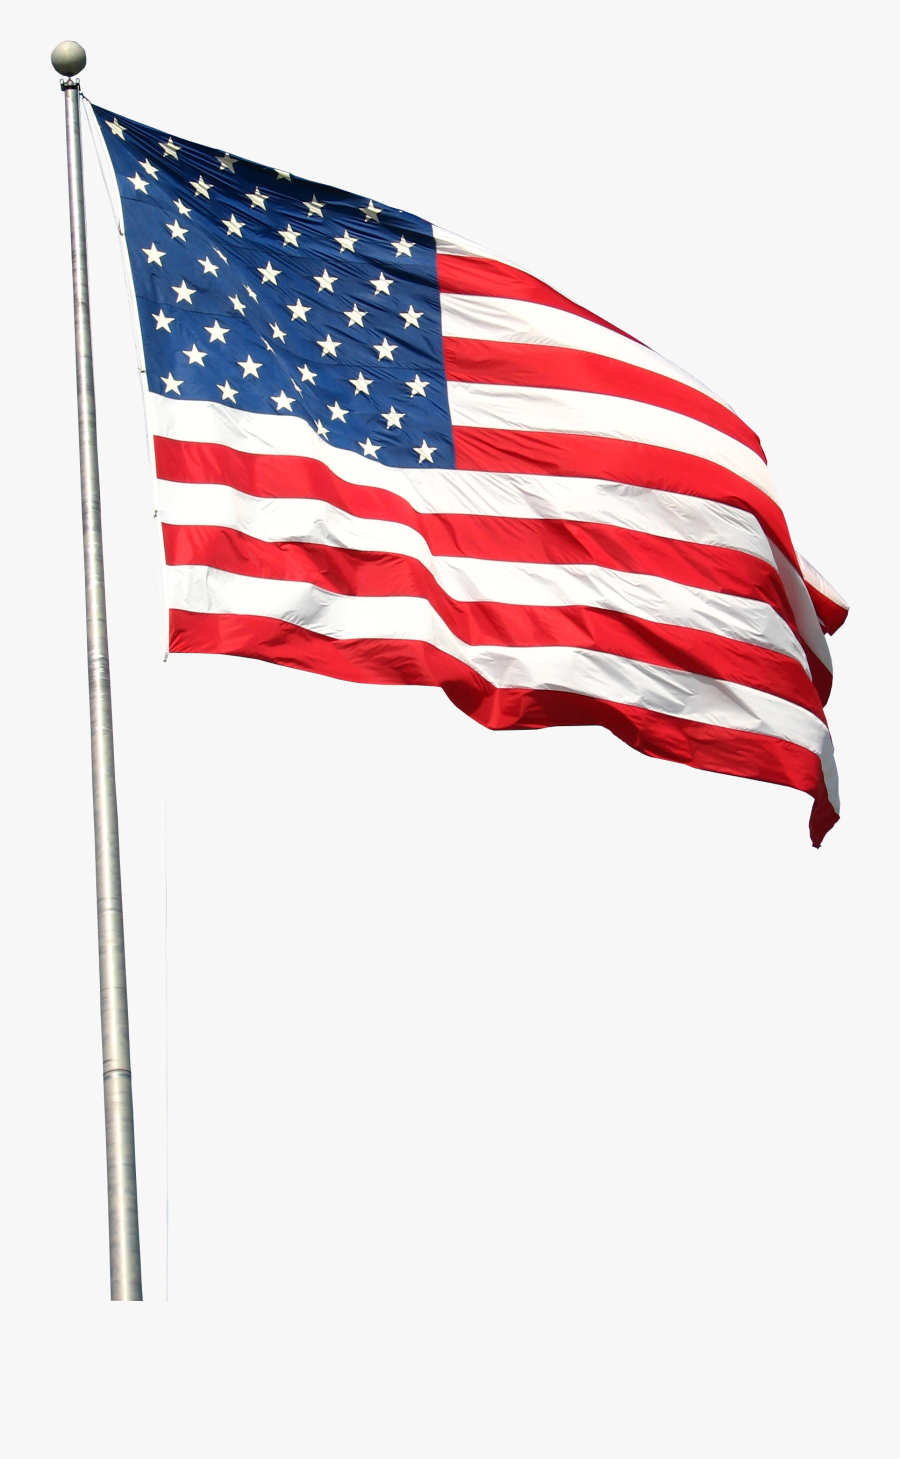 Flags Clipart American - American Flag Pole Transparent Background, Transparent Clipart